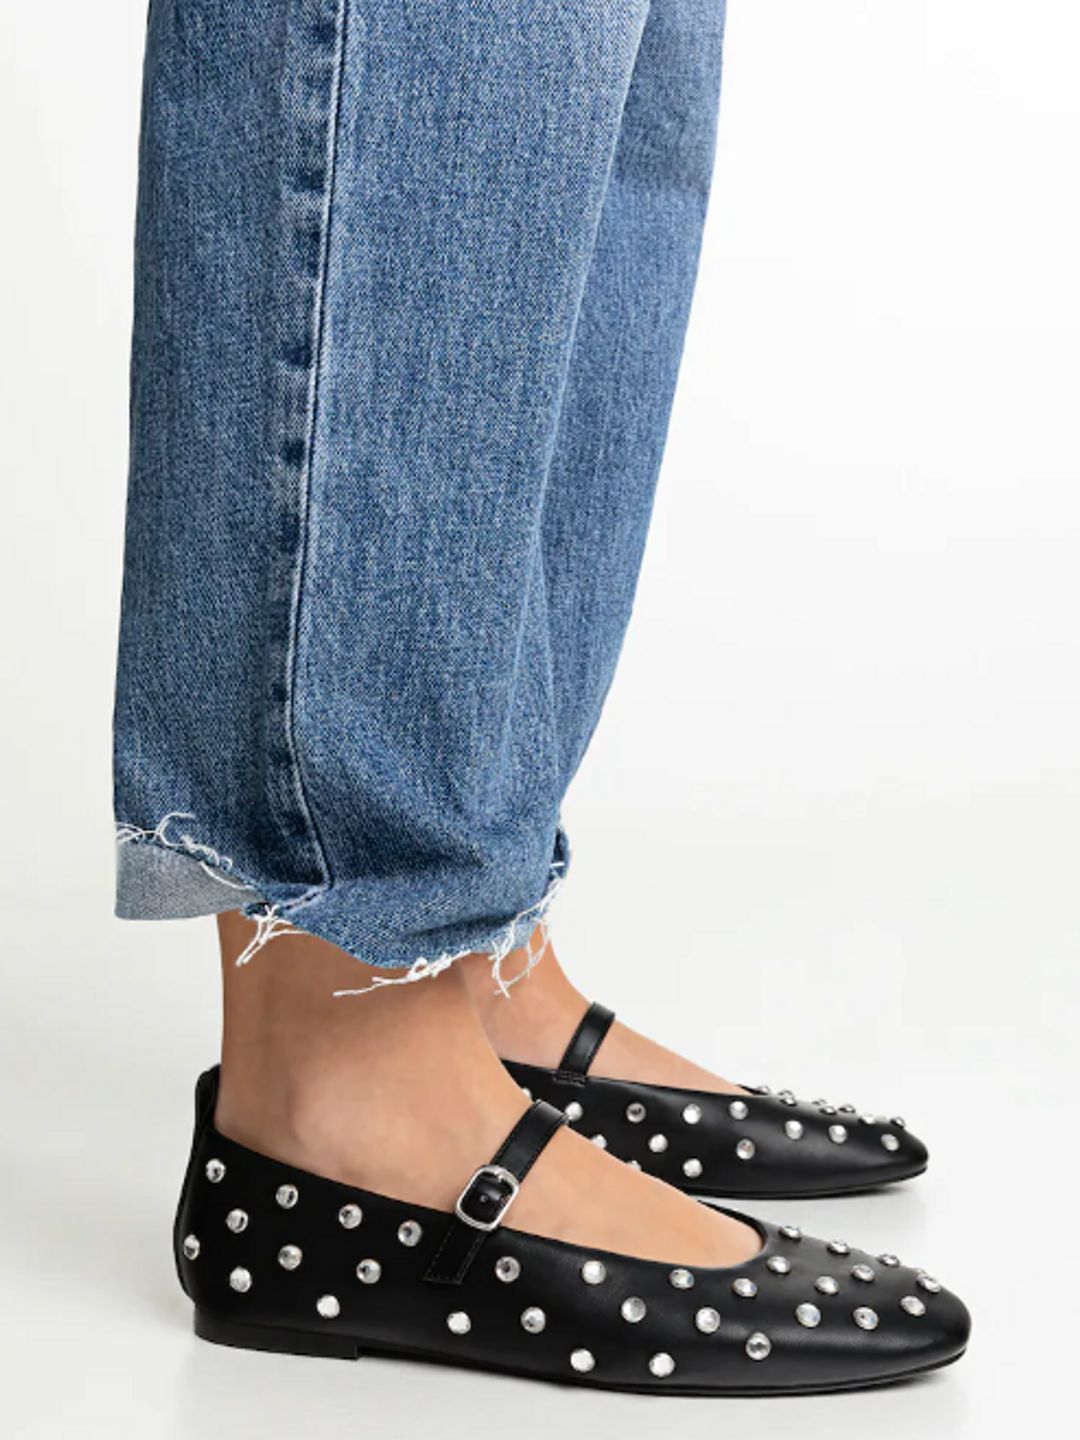 21 Party Season Flat Shoes for Comfy Glamour: ASOS, Zara, Jimmy Choo ...